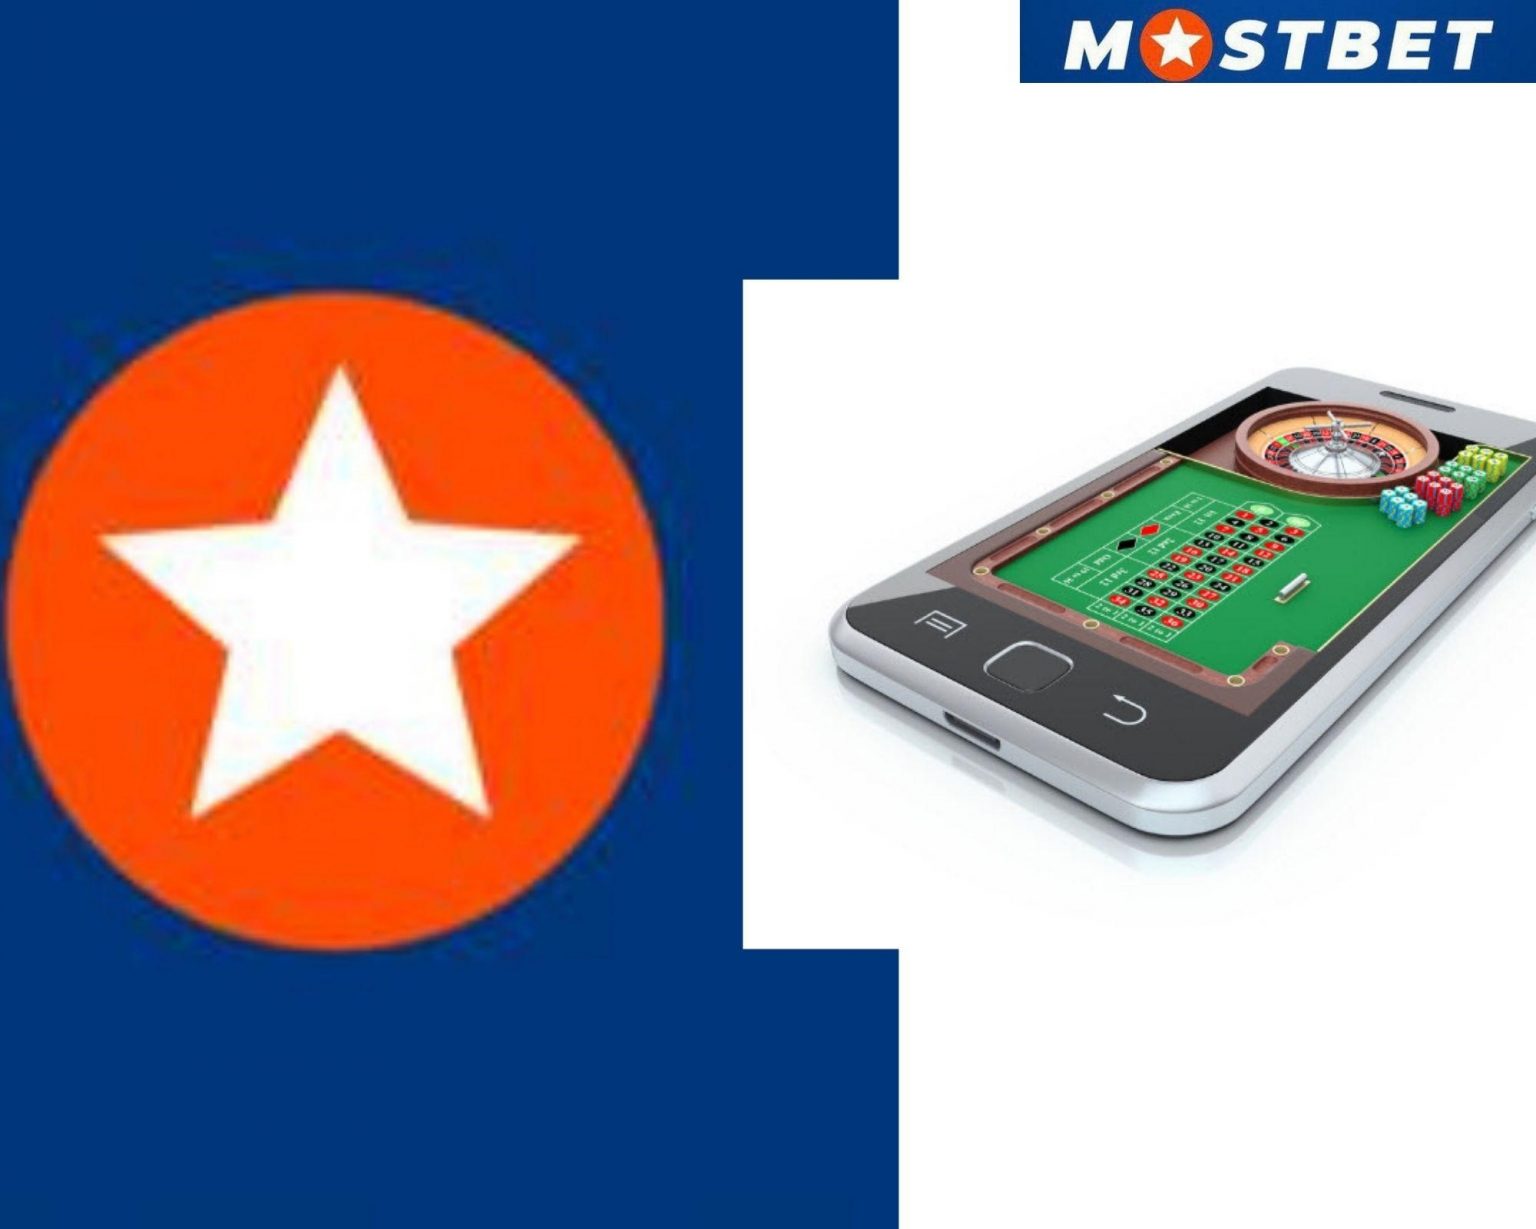 Mostbet App Install as well as Features to have Betting